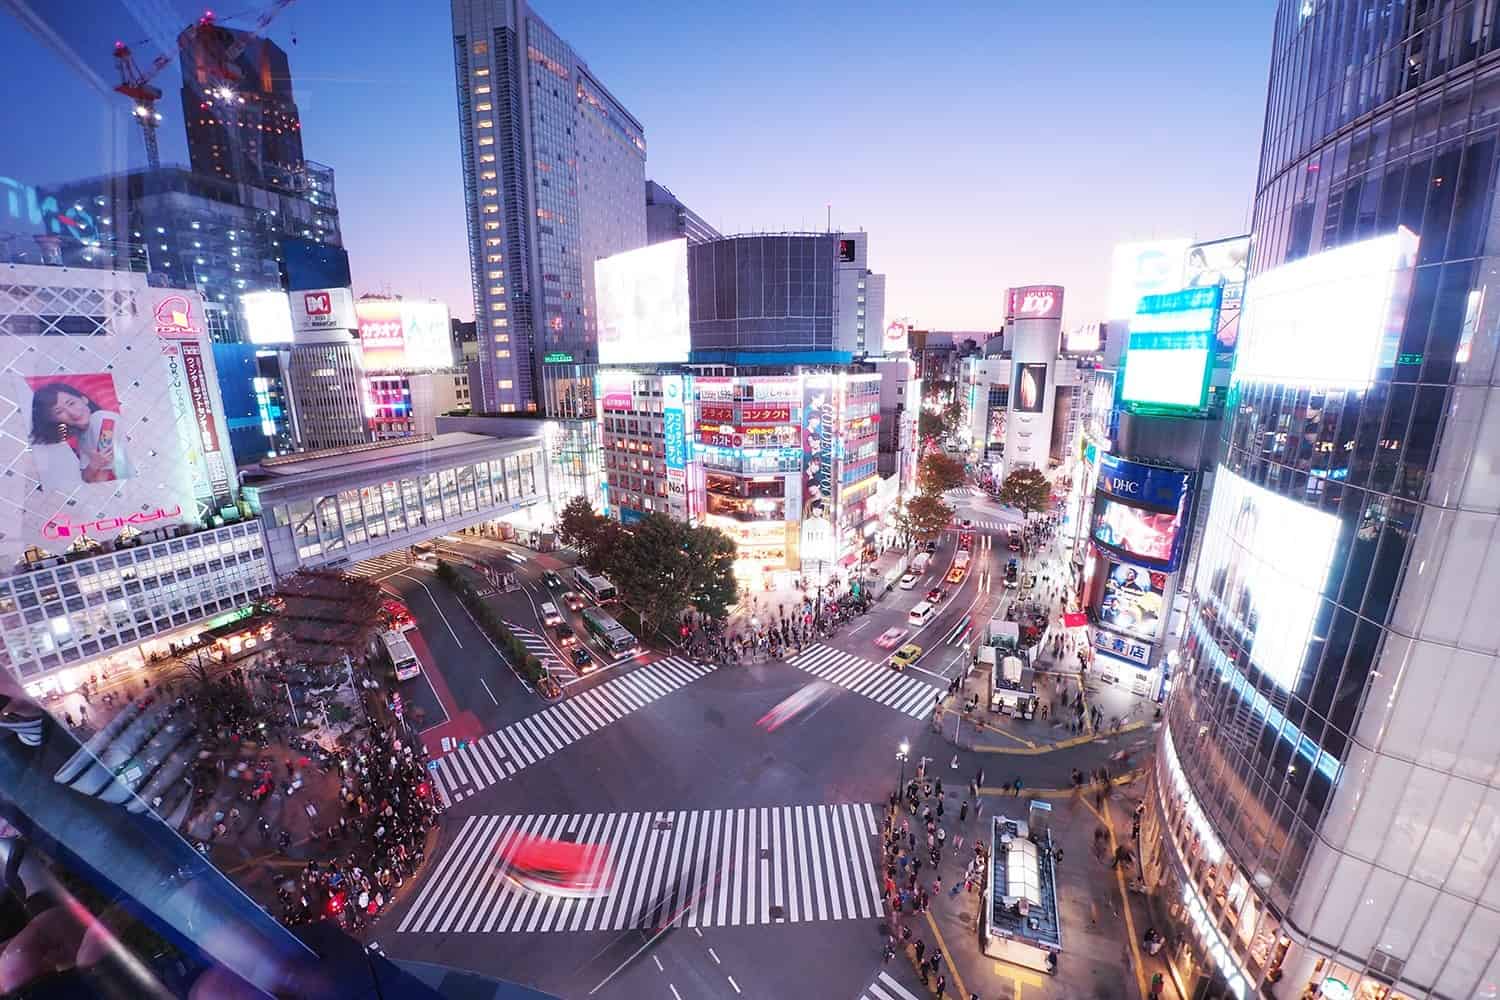 A Brand New Must-See Location in Shinjuku, Tokyo - Japan's Largest